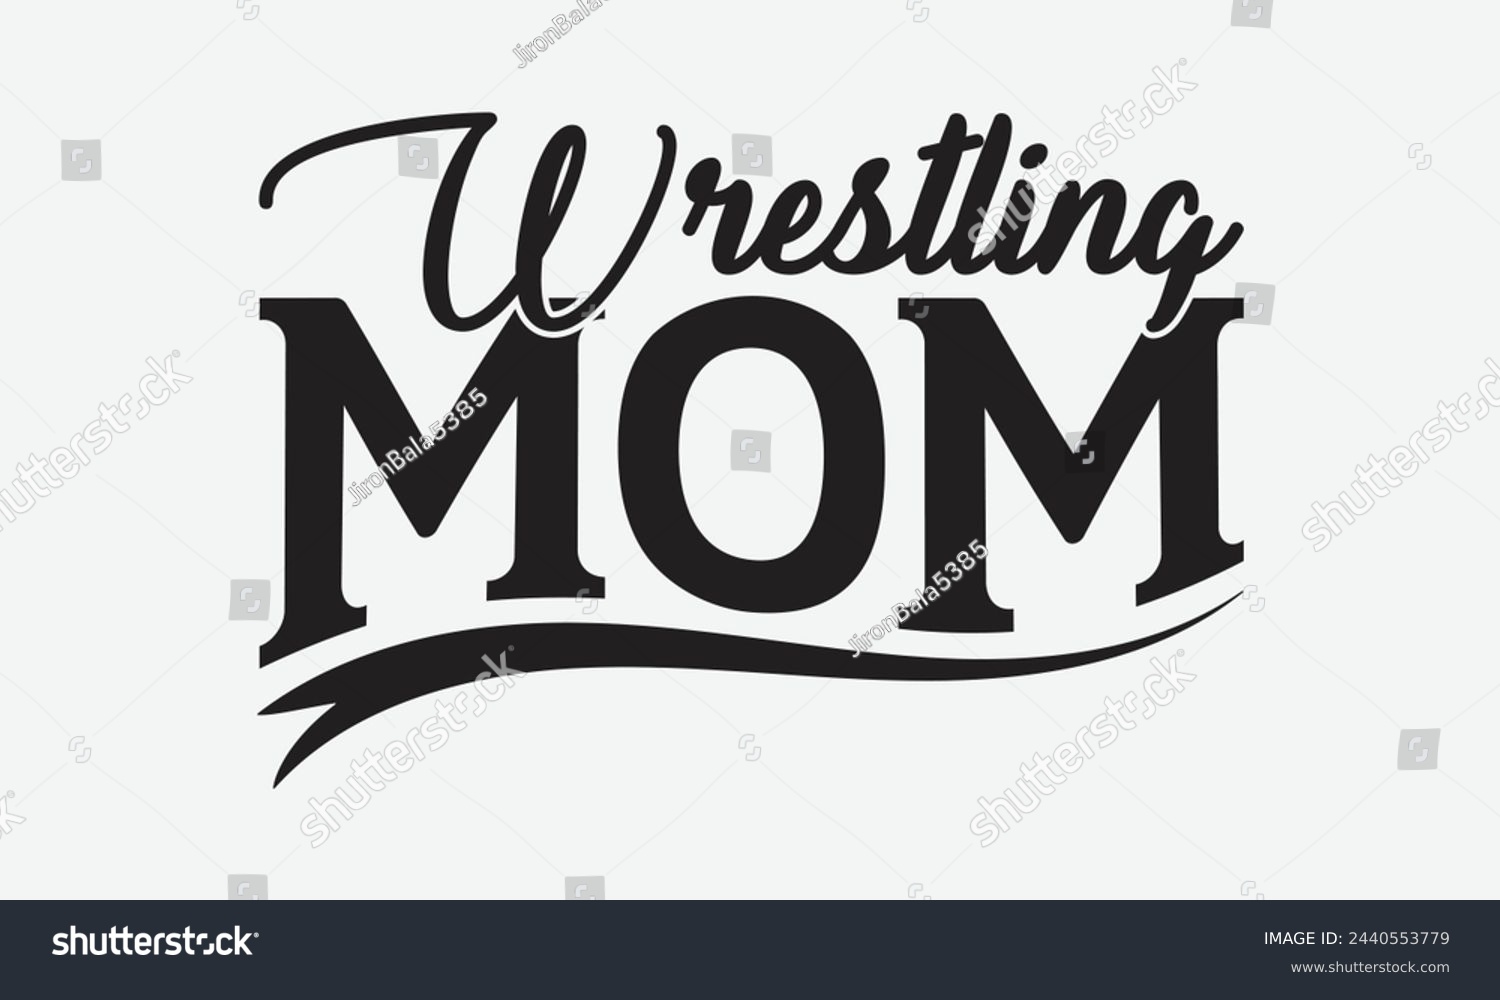 SVG of  Wrestling mom - Mom t-shirt design, isolated on white background, this illustration can be used as a print on t-shirts and bags, cover book, template, stationary or as a poster. svg